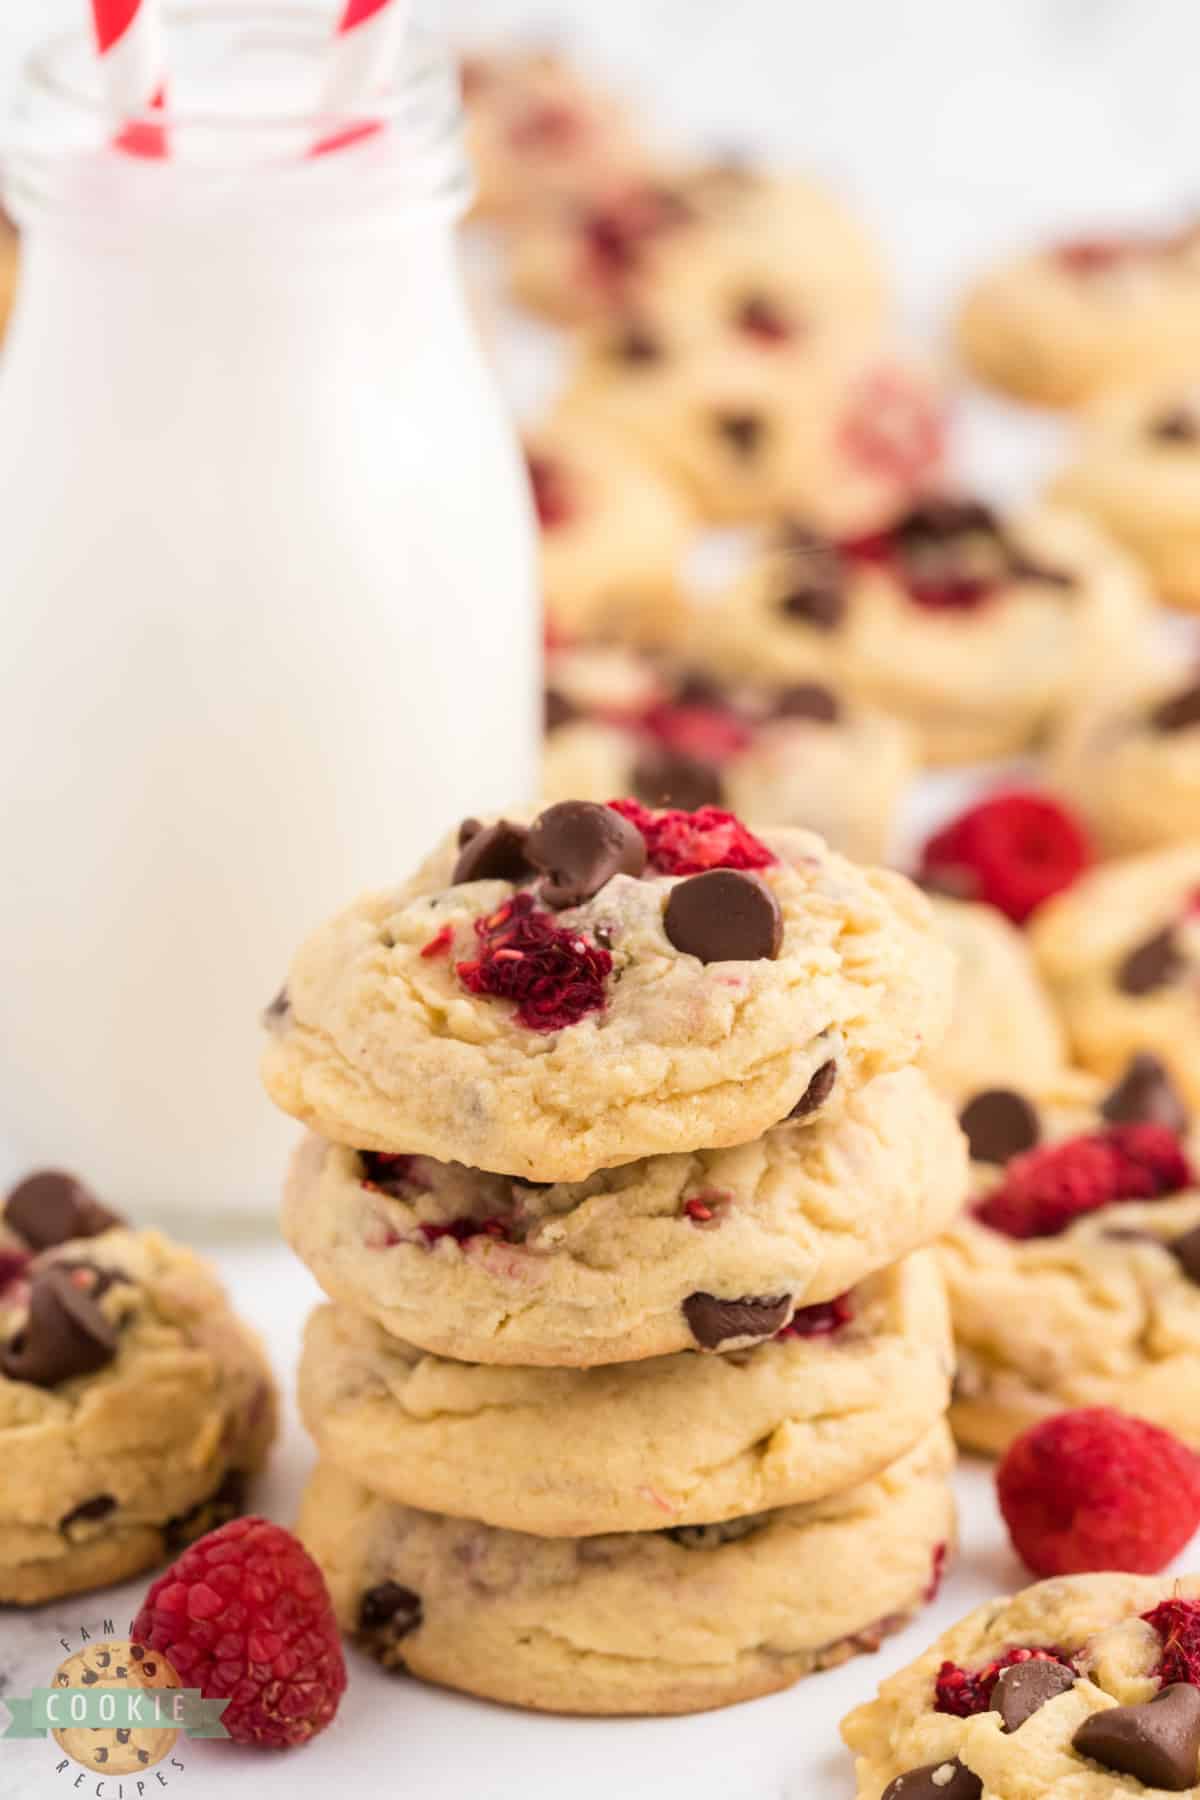 Raspberry Chocolate Chip Cookies are soft, chewy and absolutely amazing! Adding fresh raspberries to a delicious classic chocolate chip cookie recipe makes such a delicious difference!